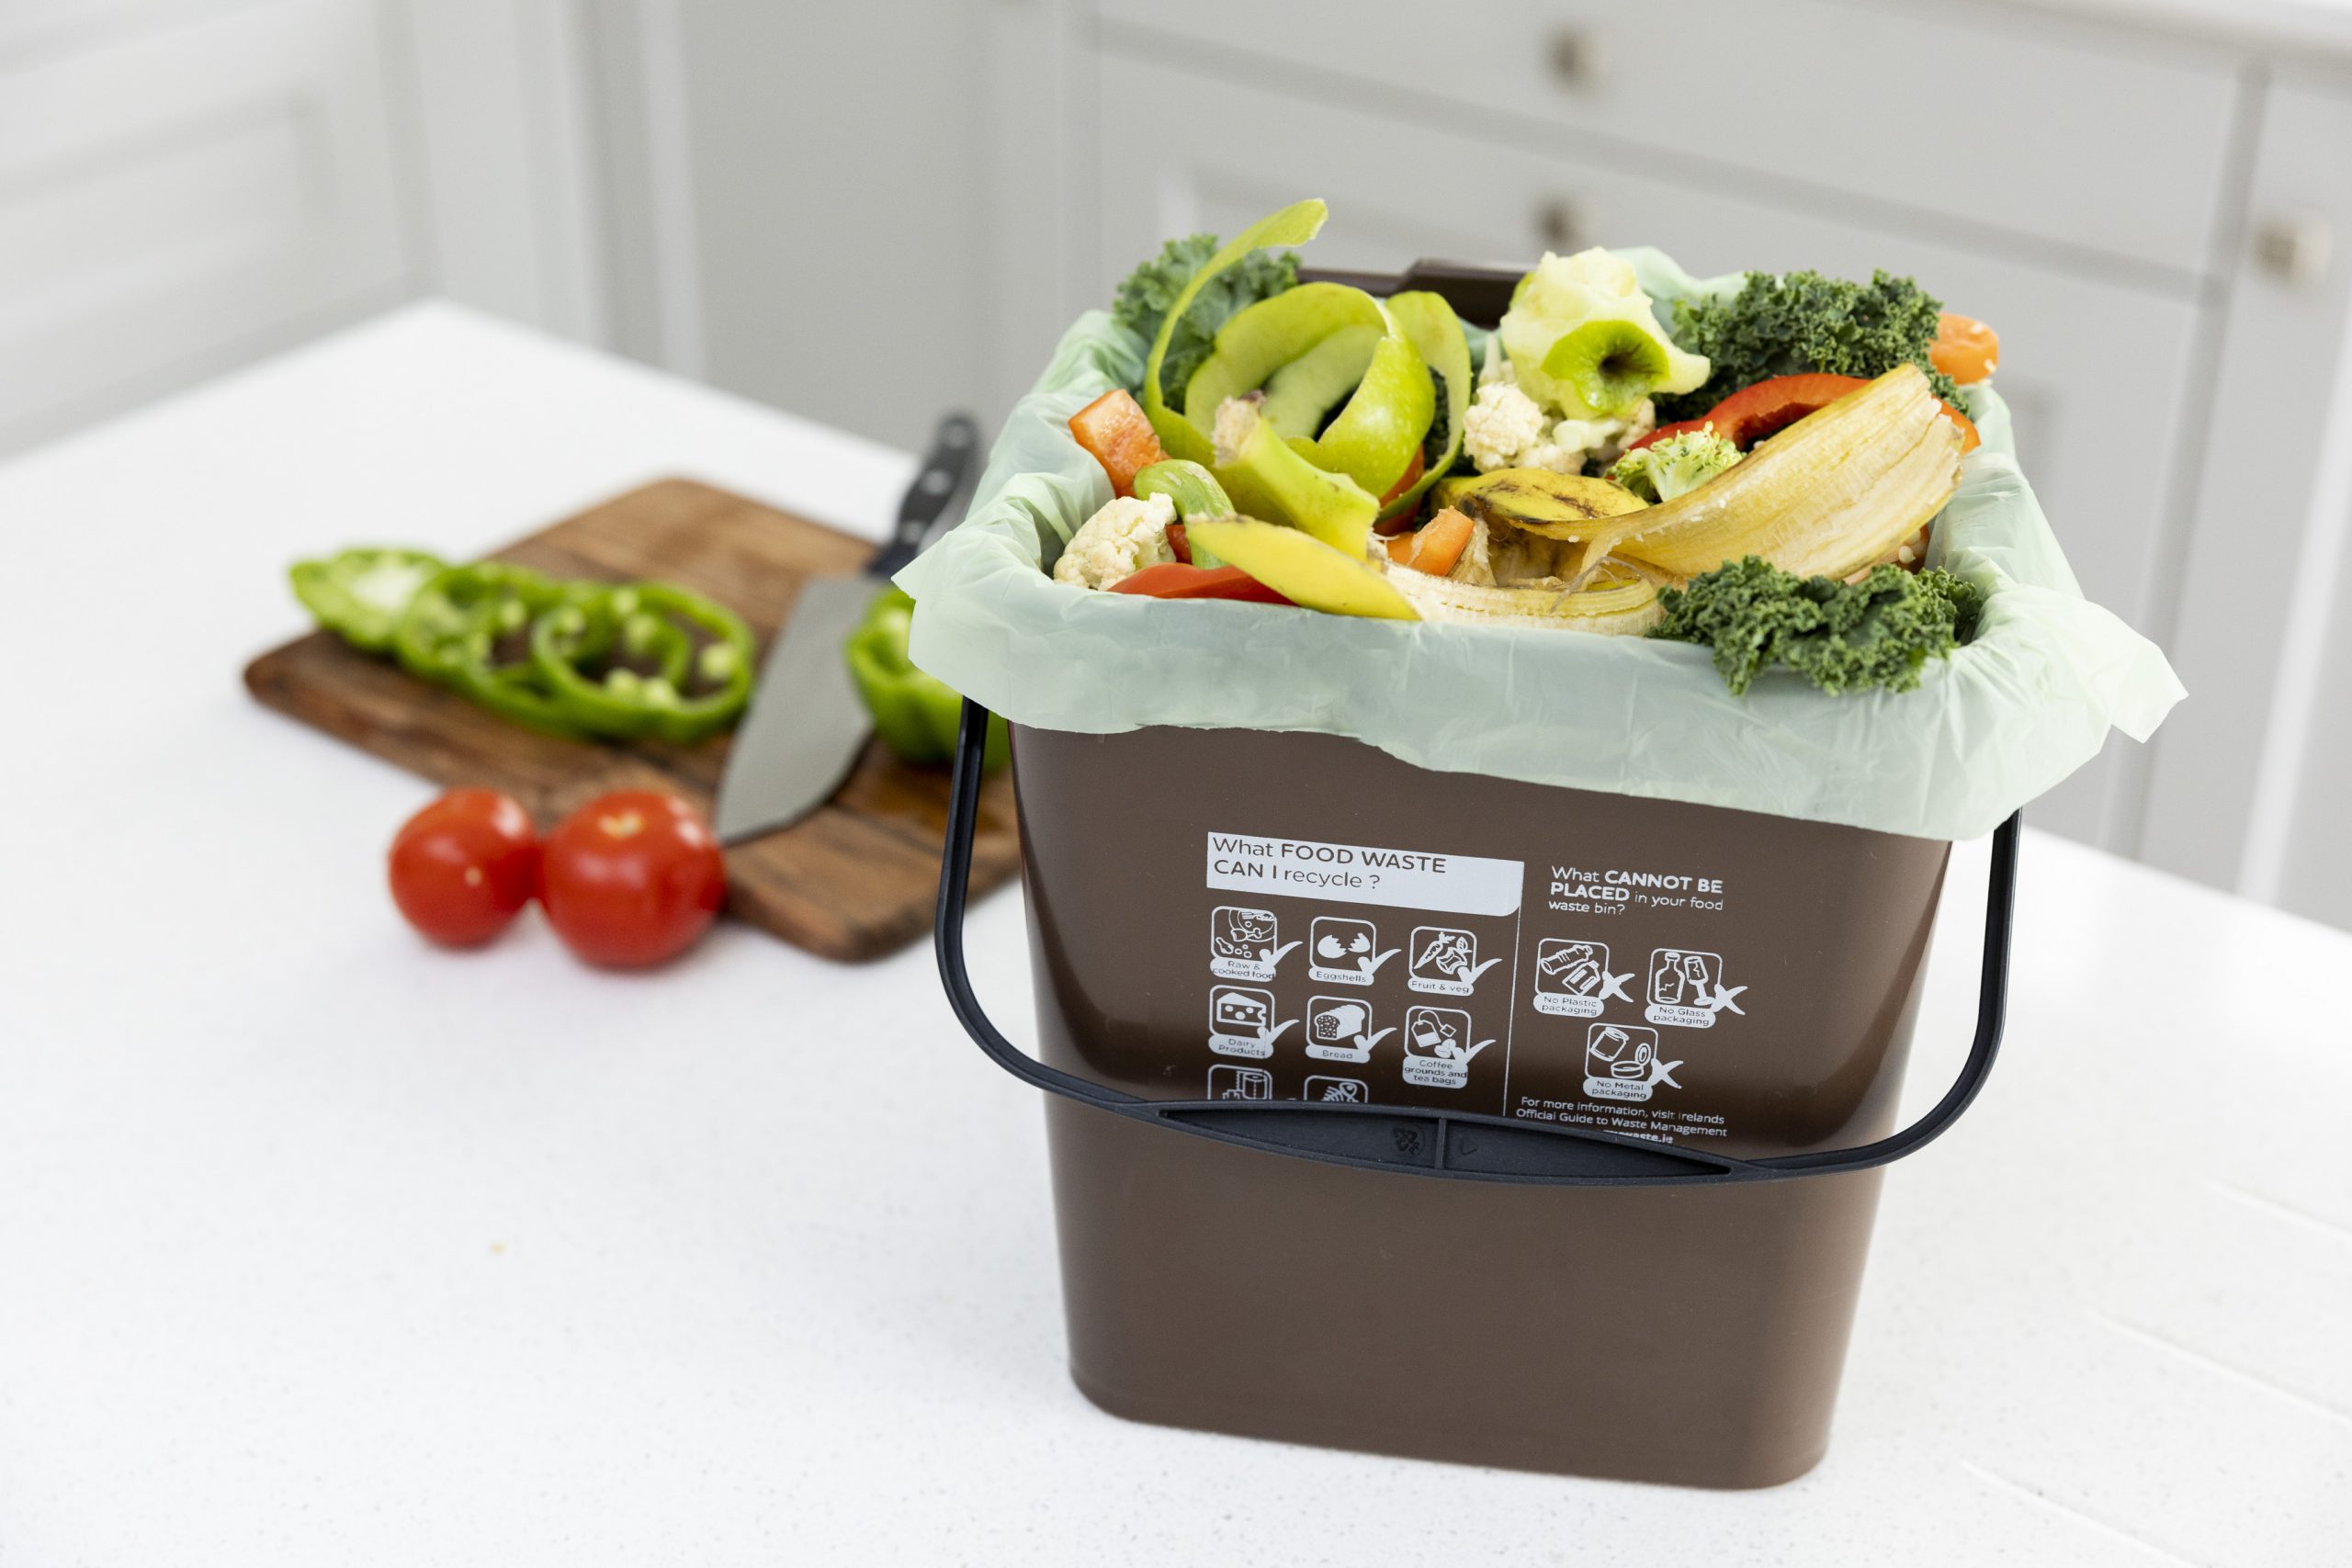 National Food Waste Recycling Week Launched 30th May – 6th June 2022